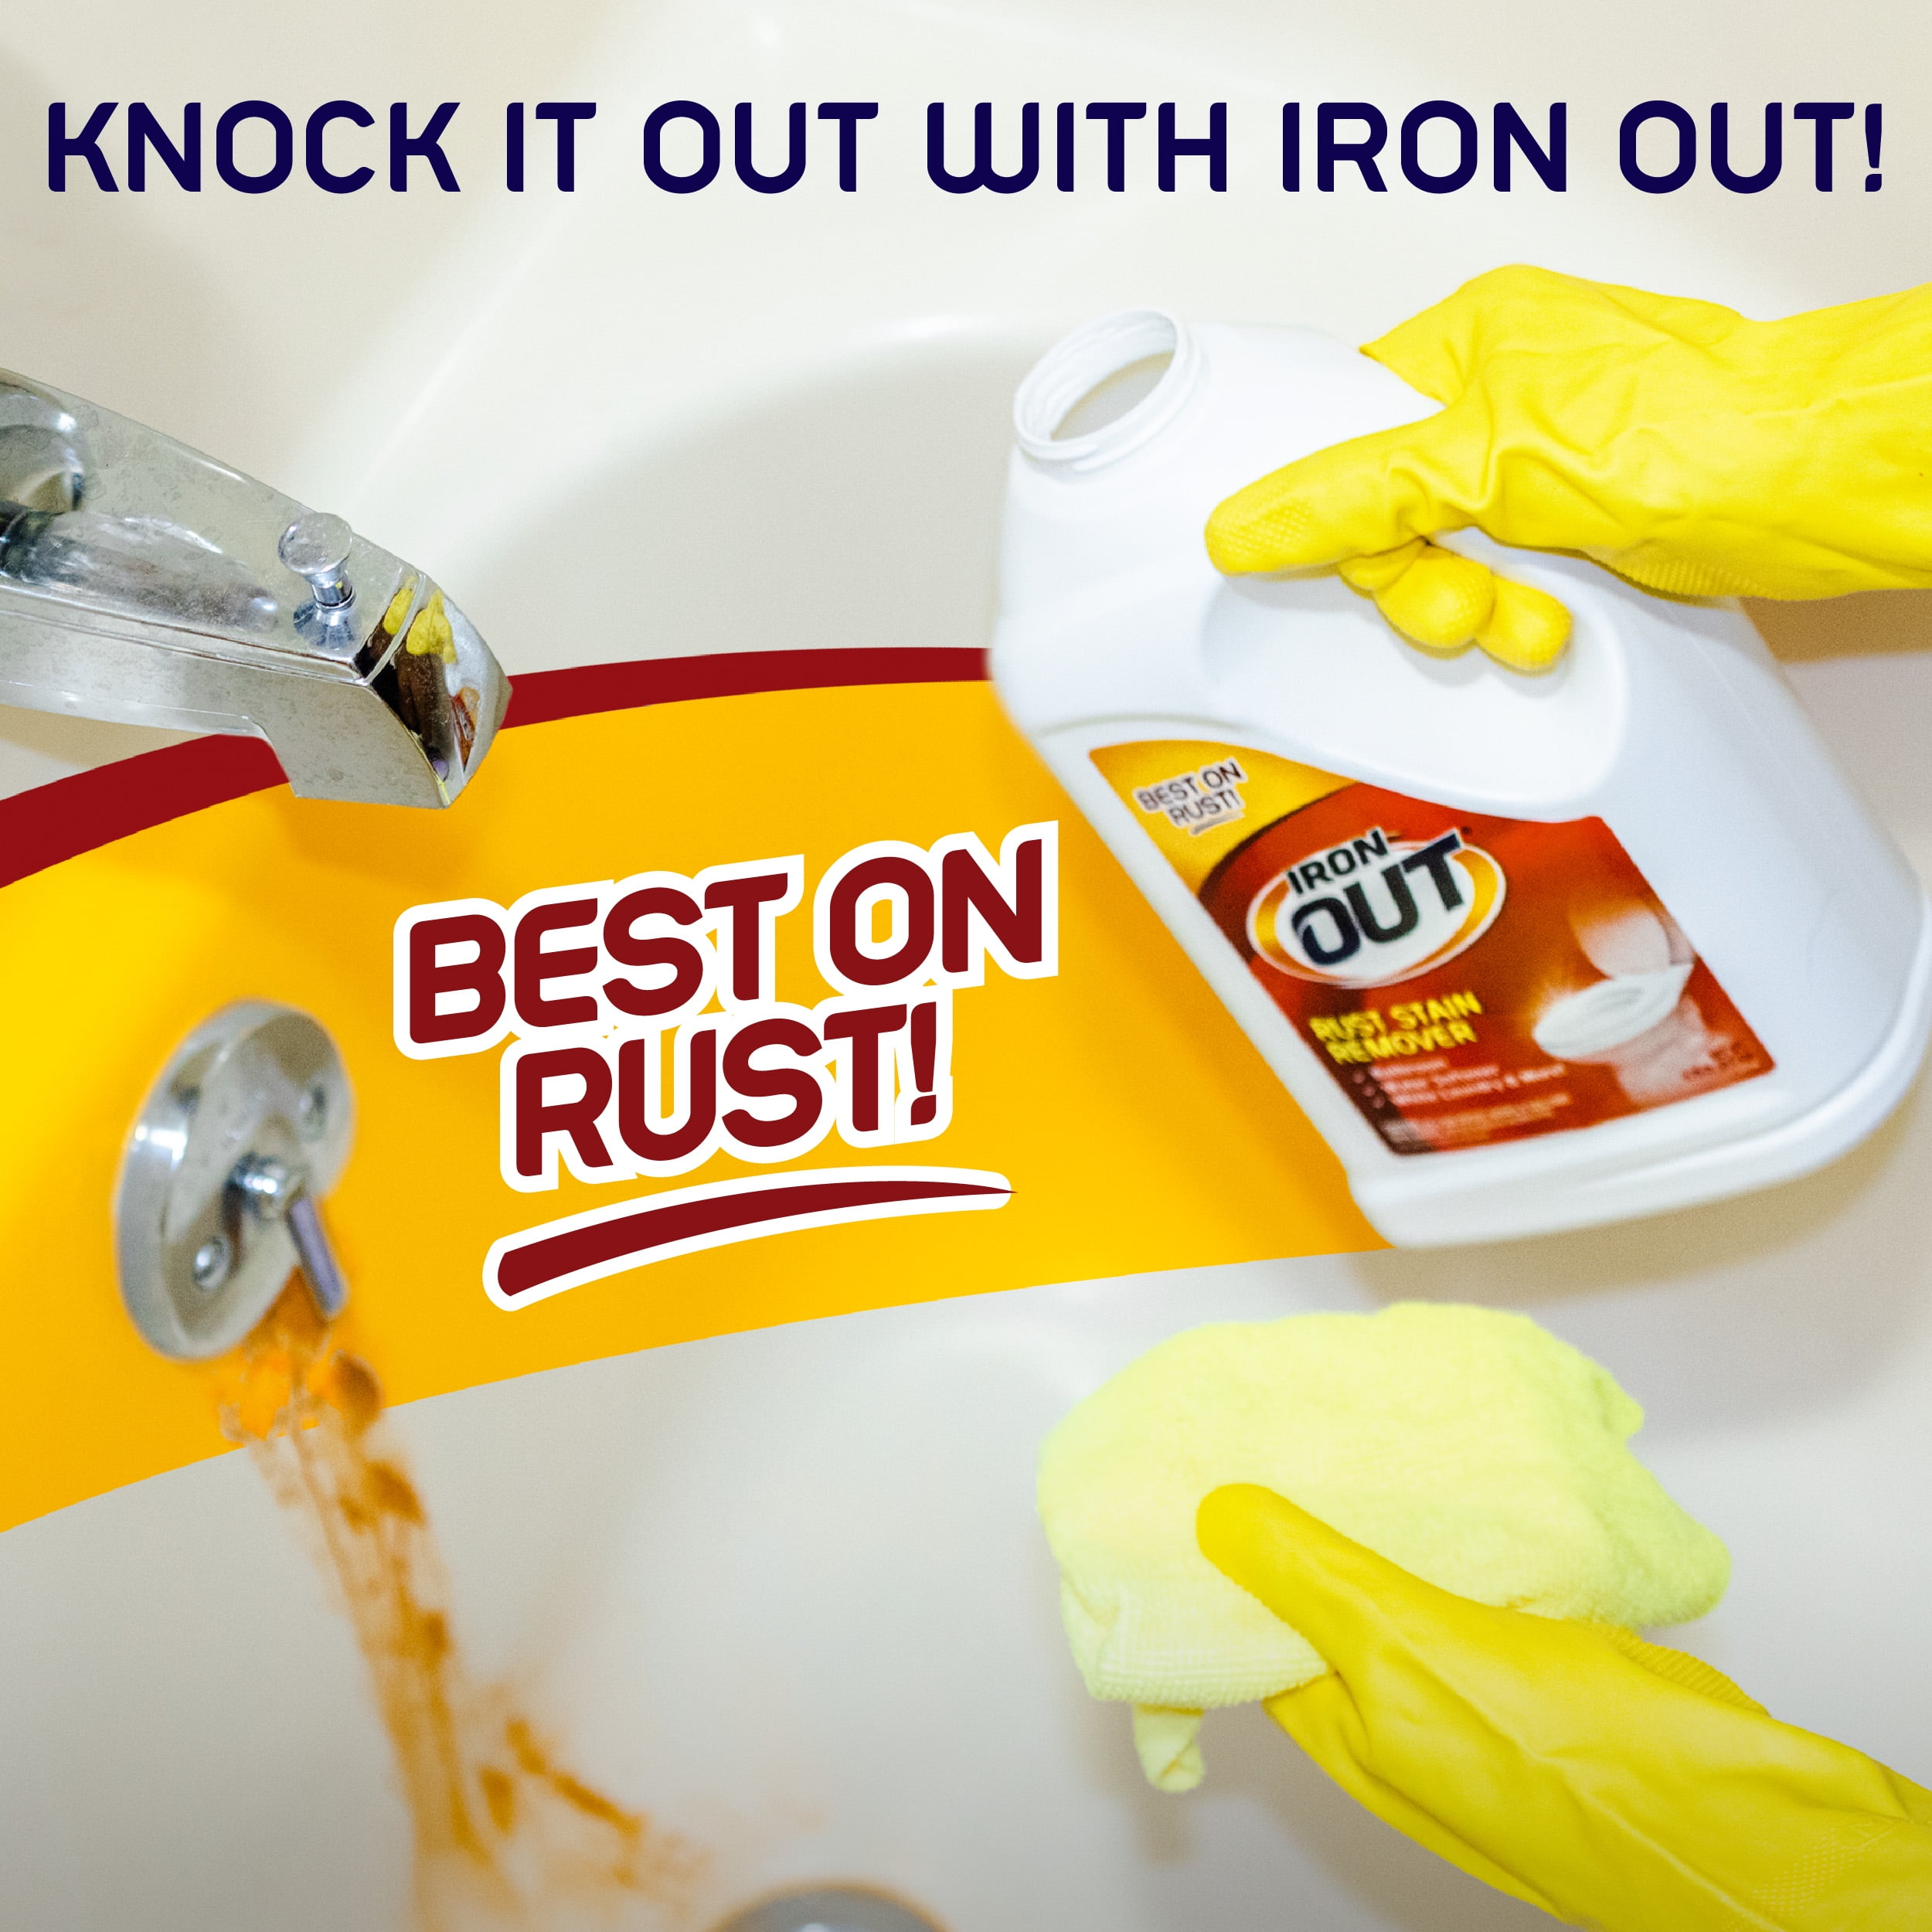 IronOut 16 oz Rust Remover - Ace Hardware